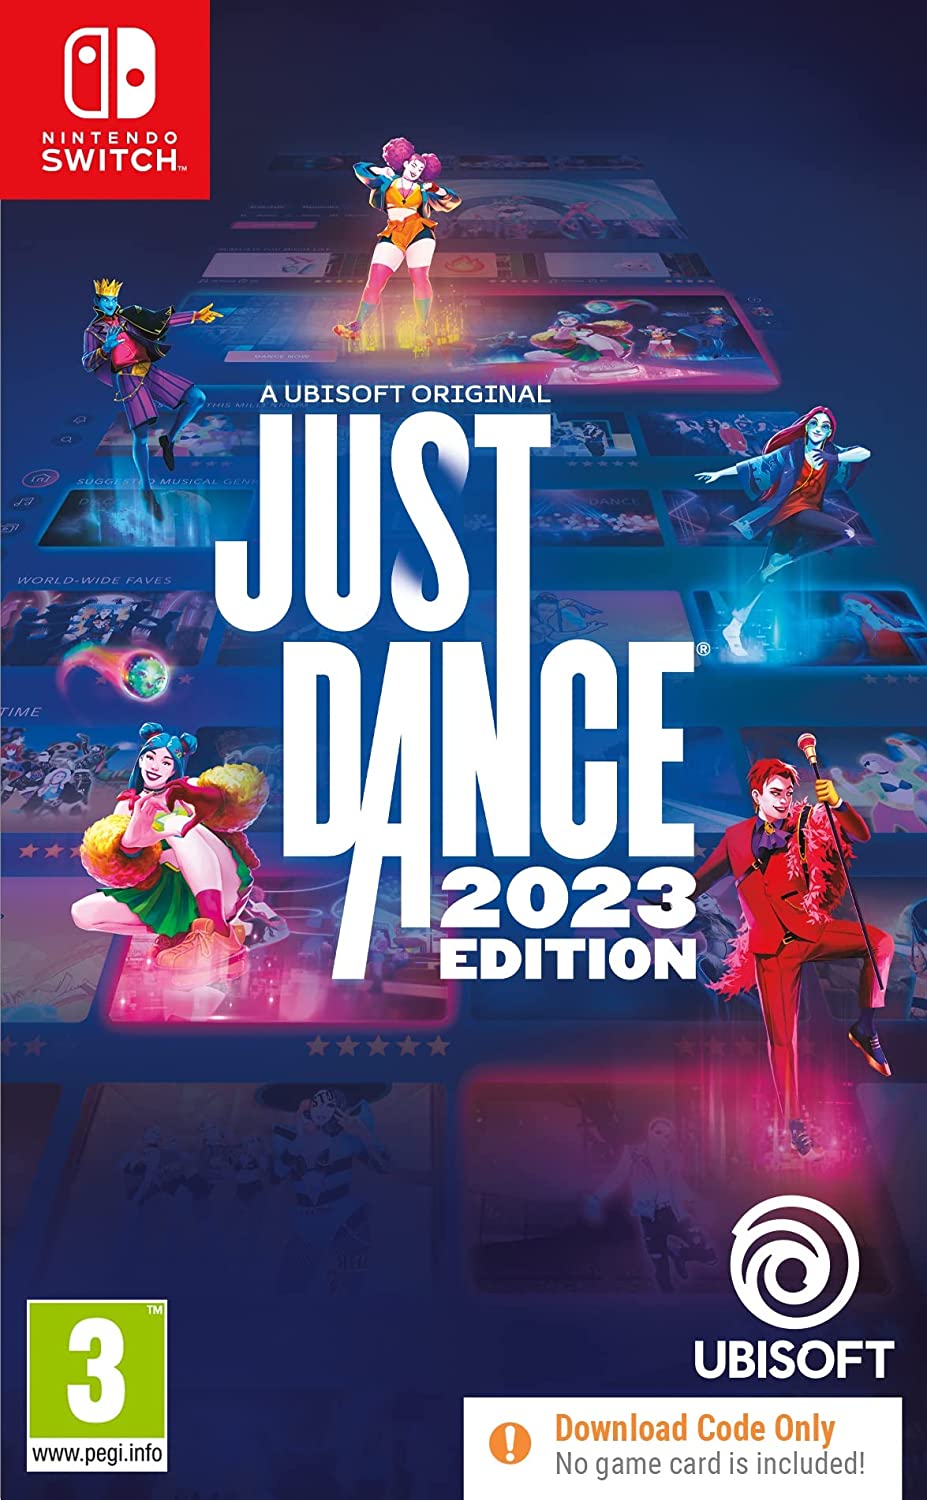 NINTENDO SWITCH: JUST DANCE 2023 EDITION (DOWNLOAD CODE) - Level UpLevel UpSwitch Video Games3307216247920